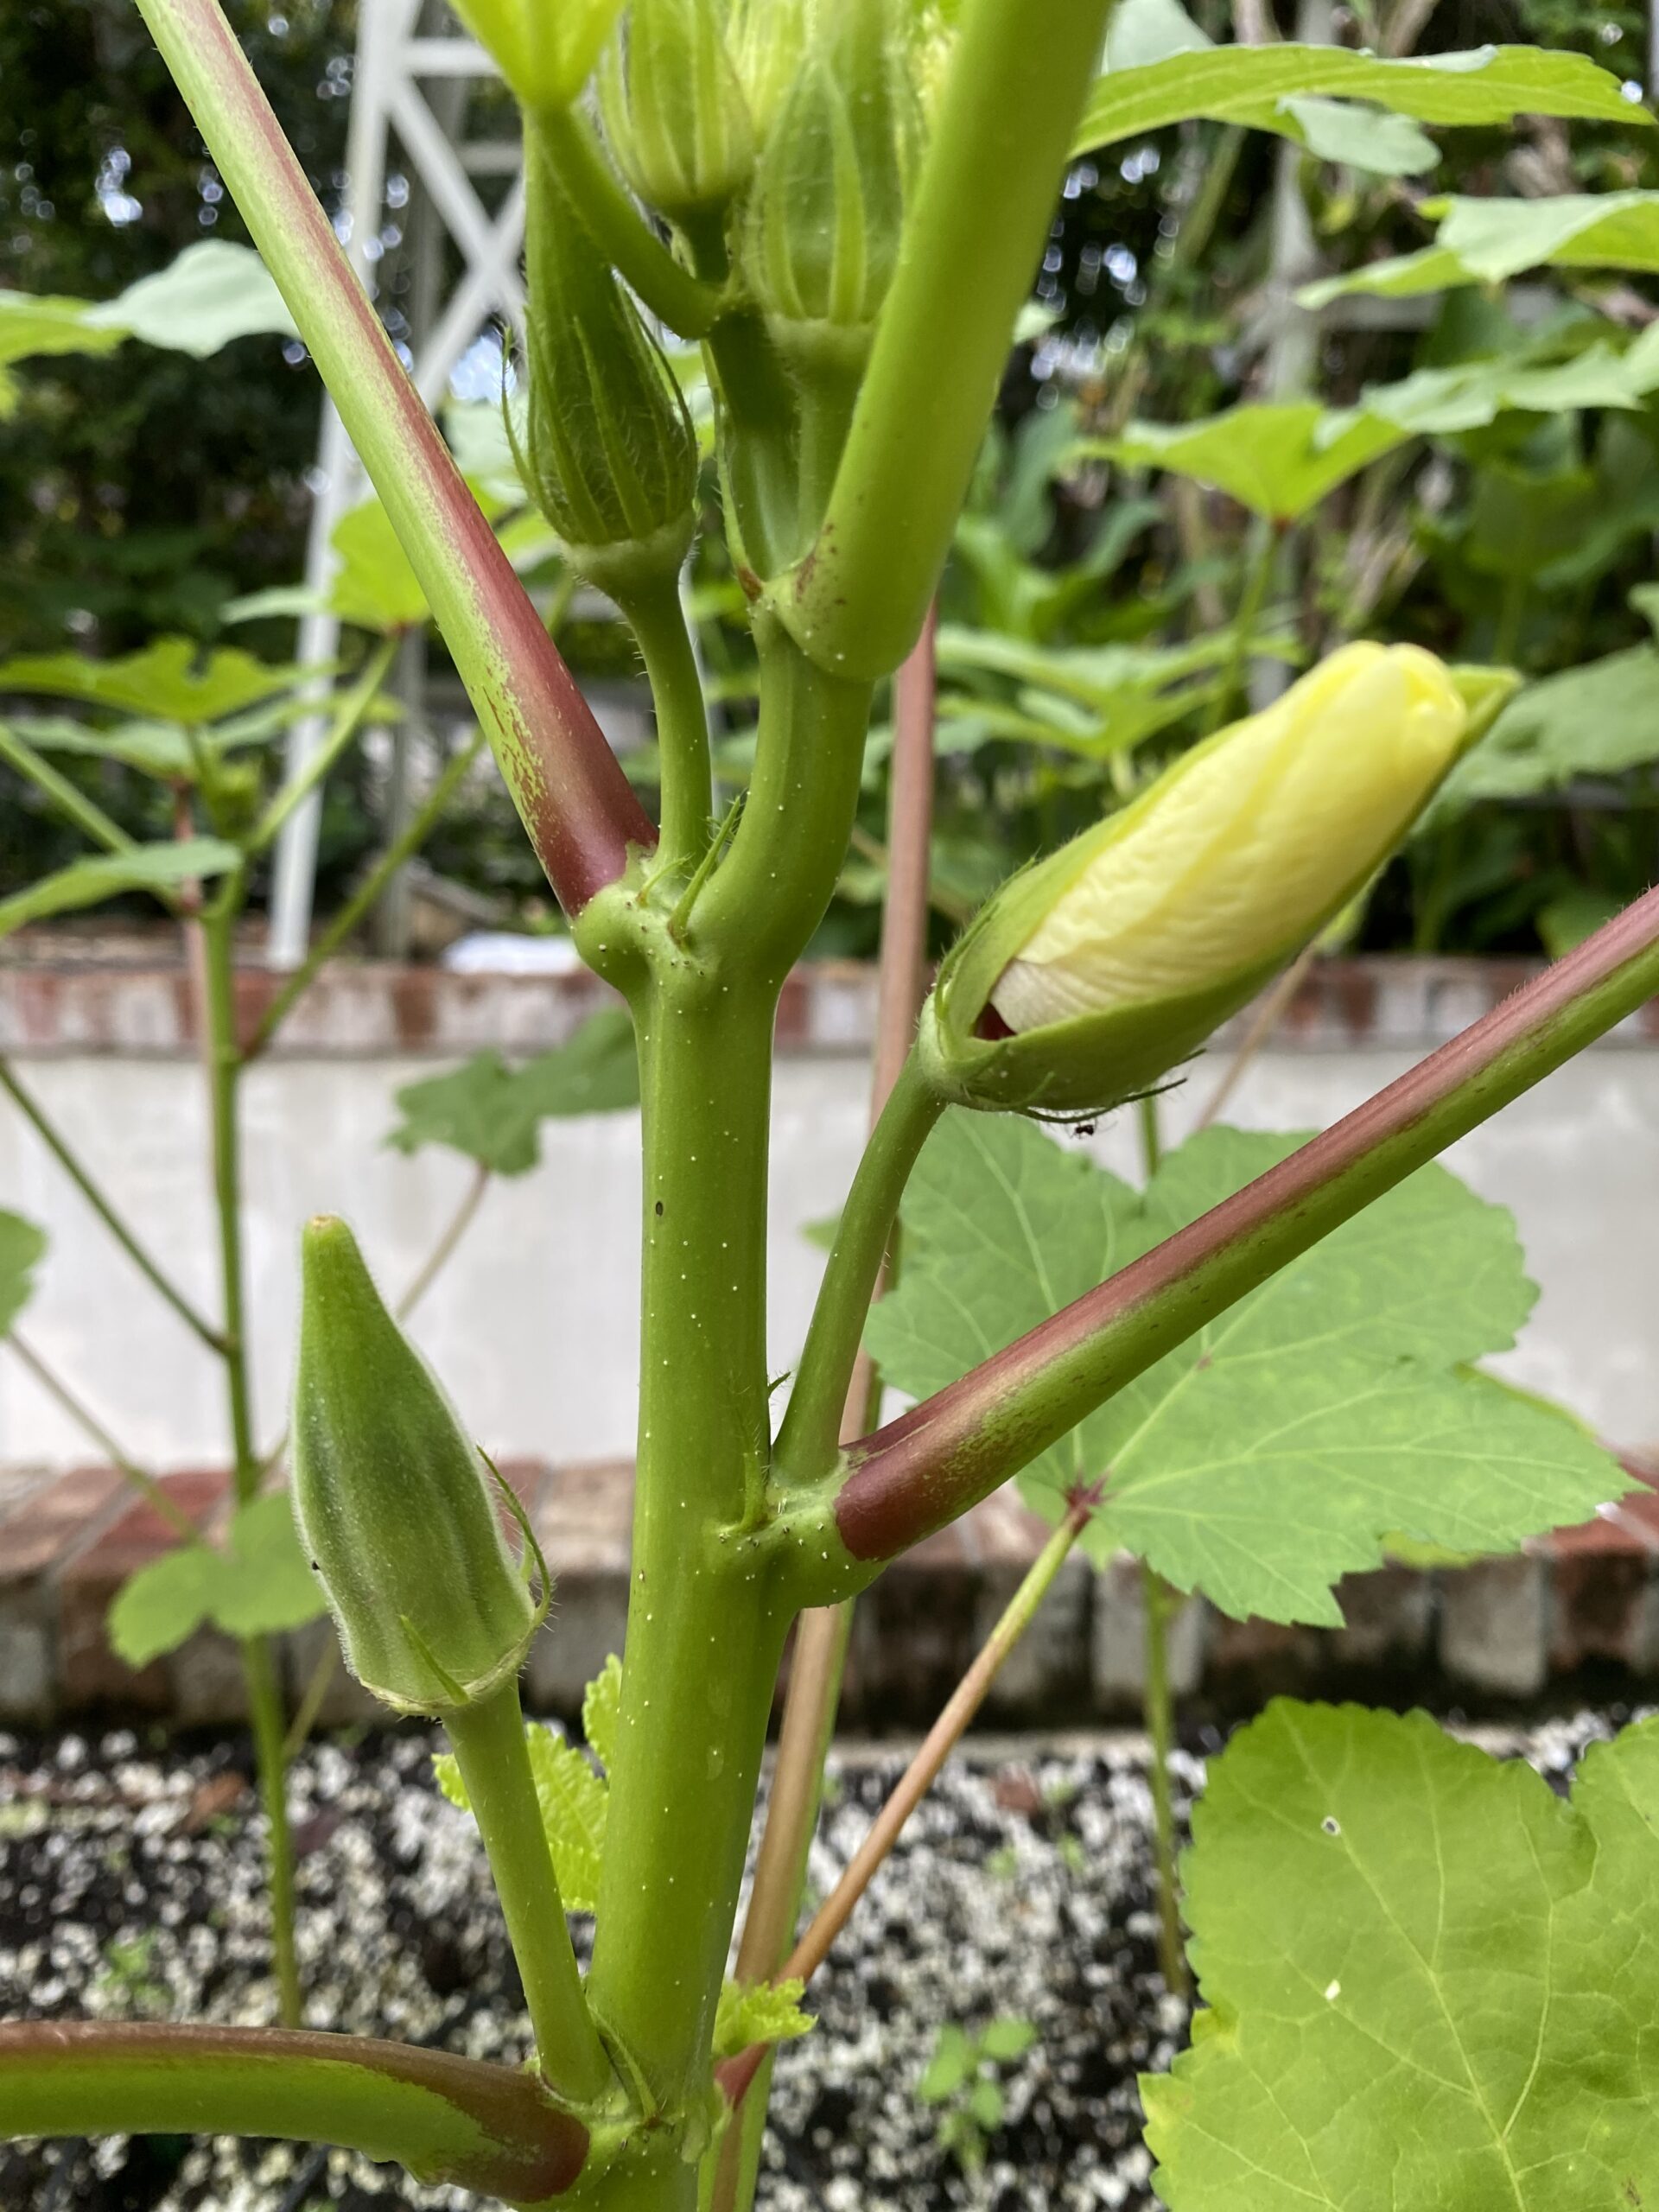 Okra flower bud and one small okra on plant